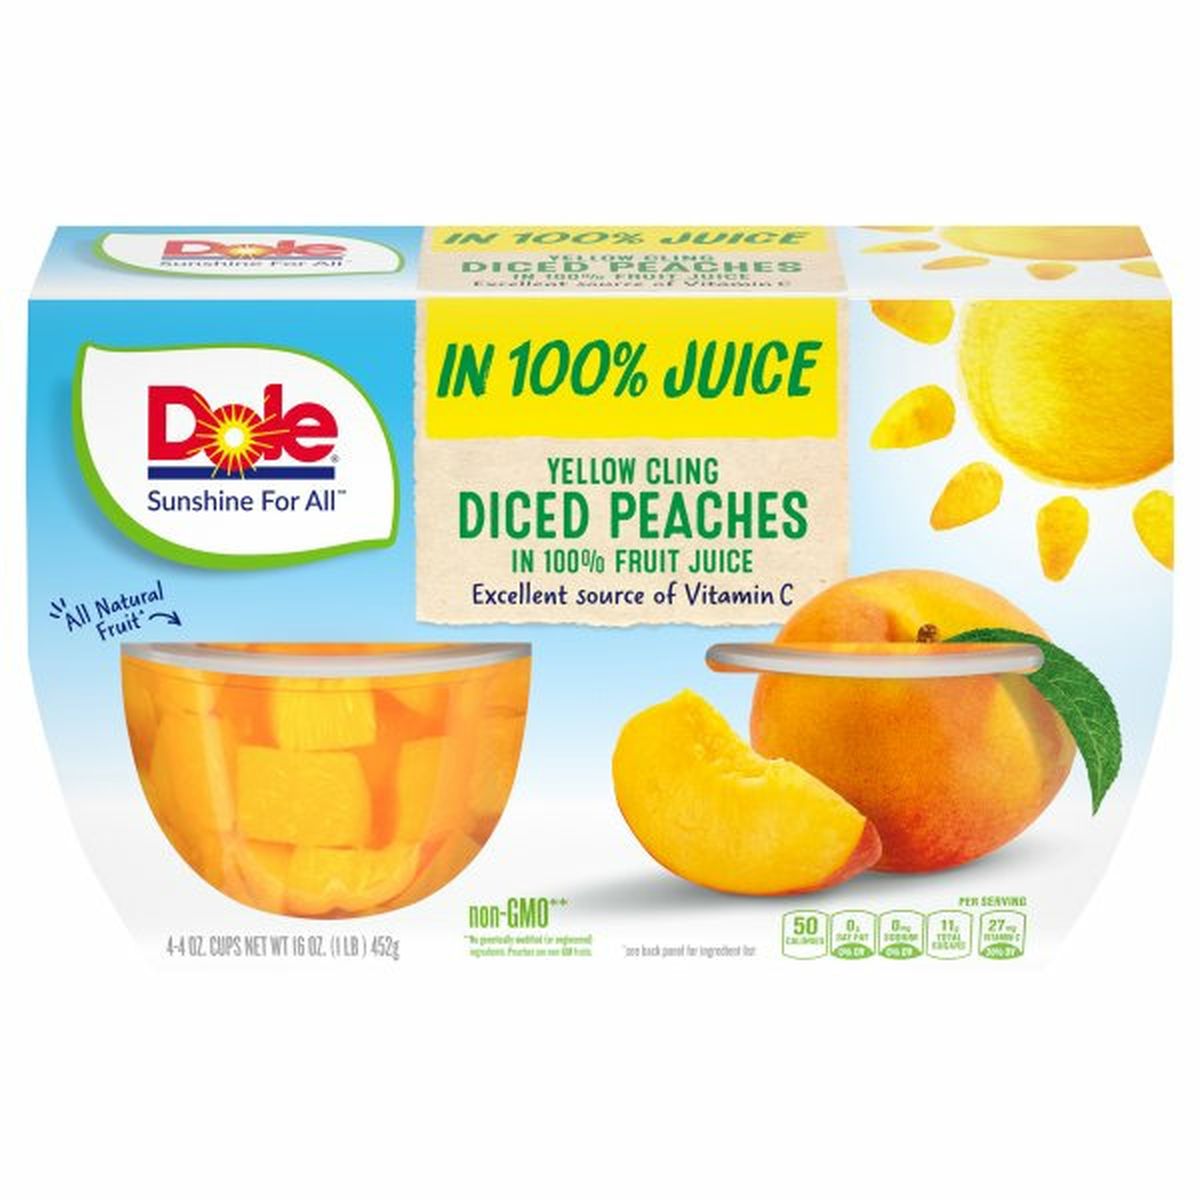 Calories in Dole Diced Peaches in 100% Fruit Juice, Yellow Cling